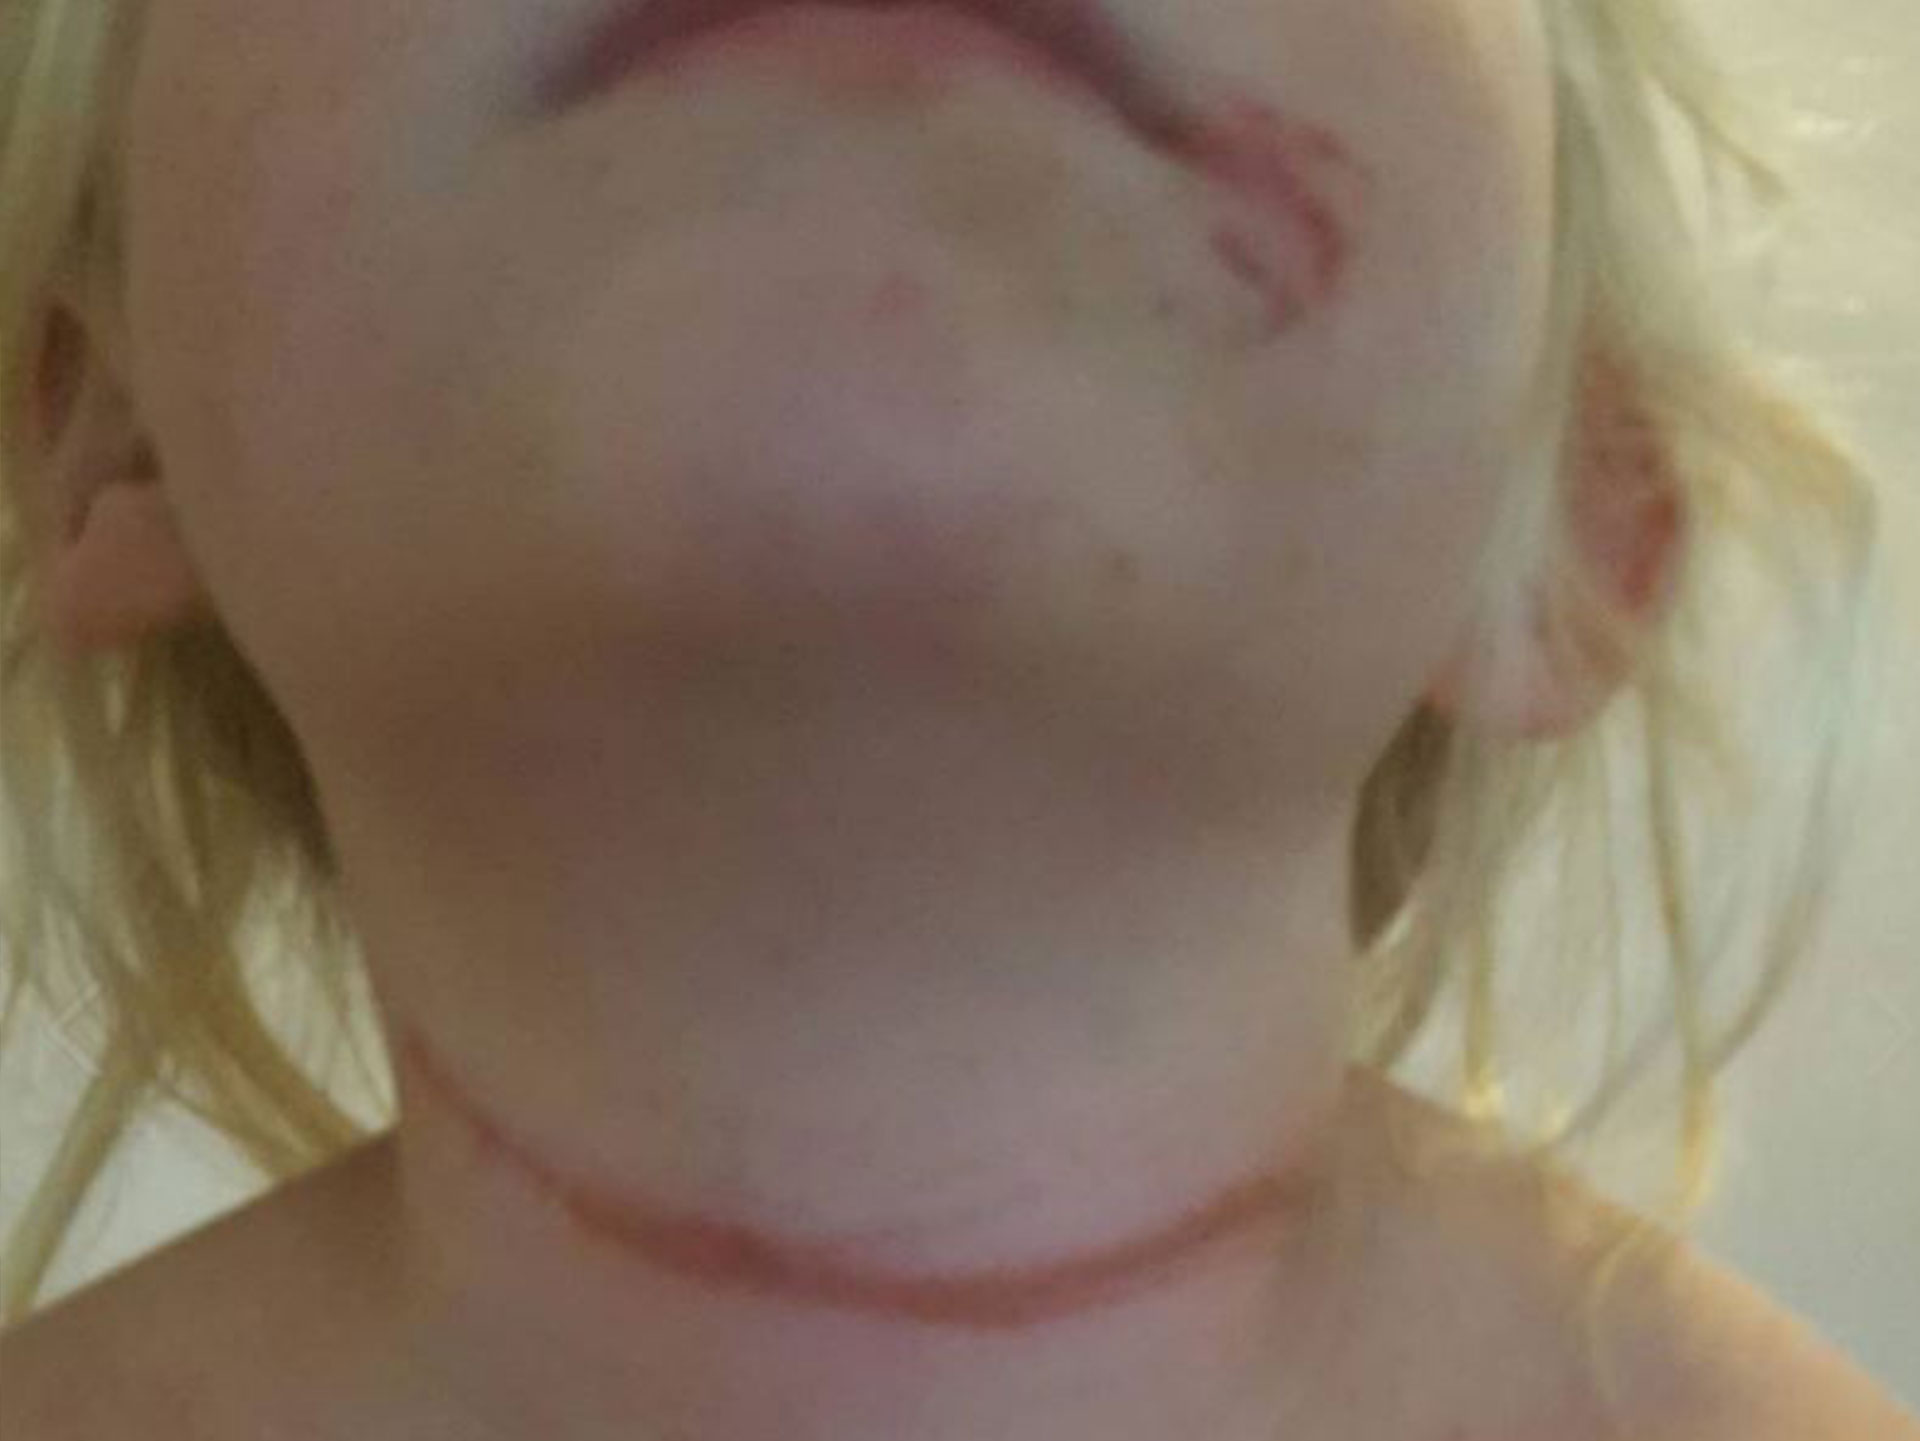 Cords on hats banned in SA schools after little girl is almost strangled